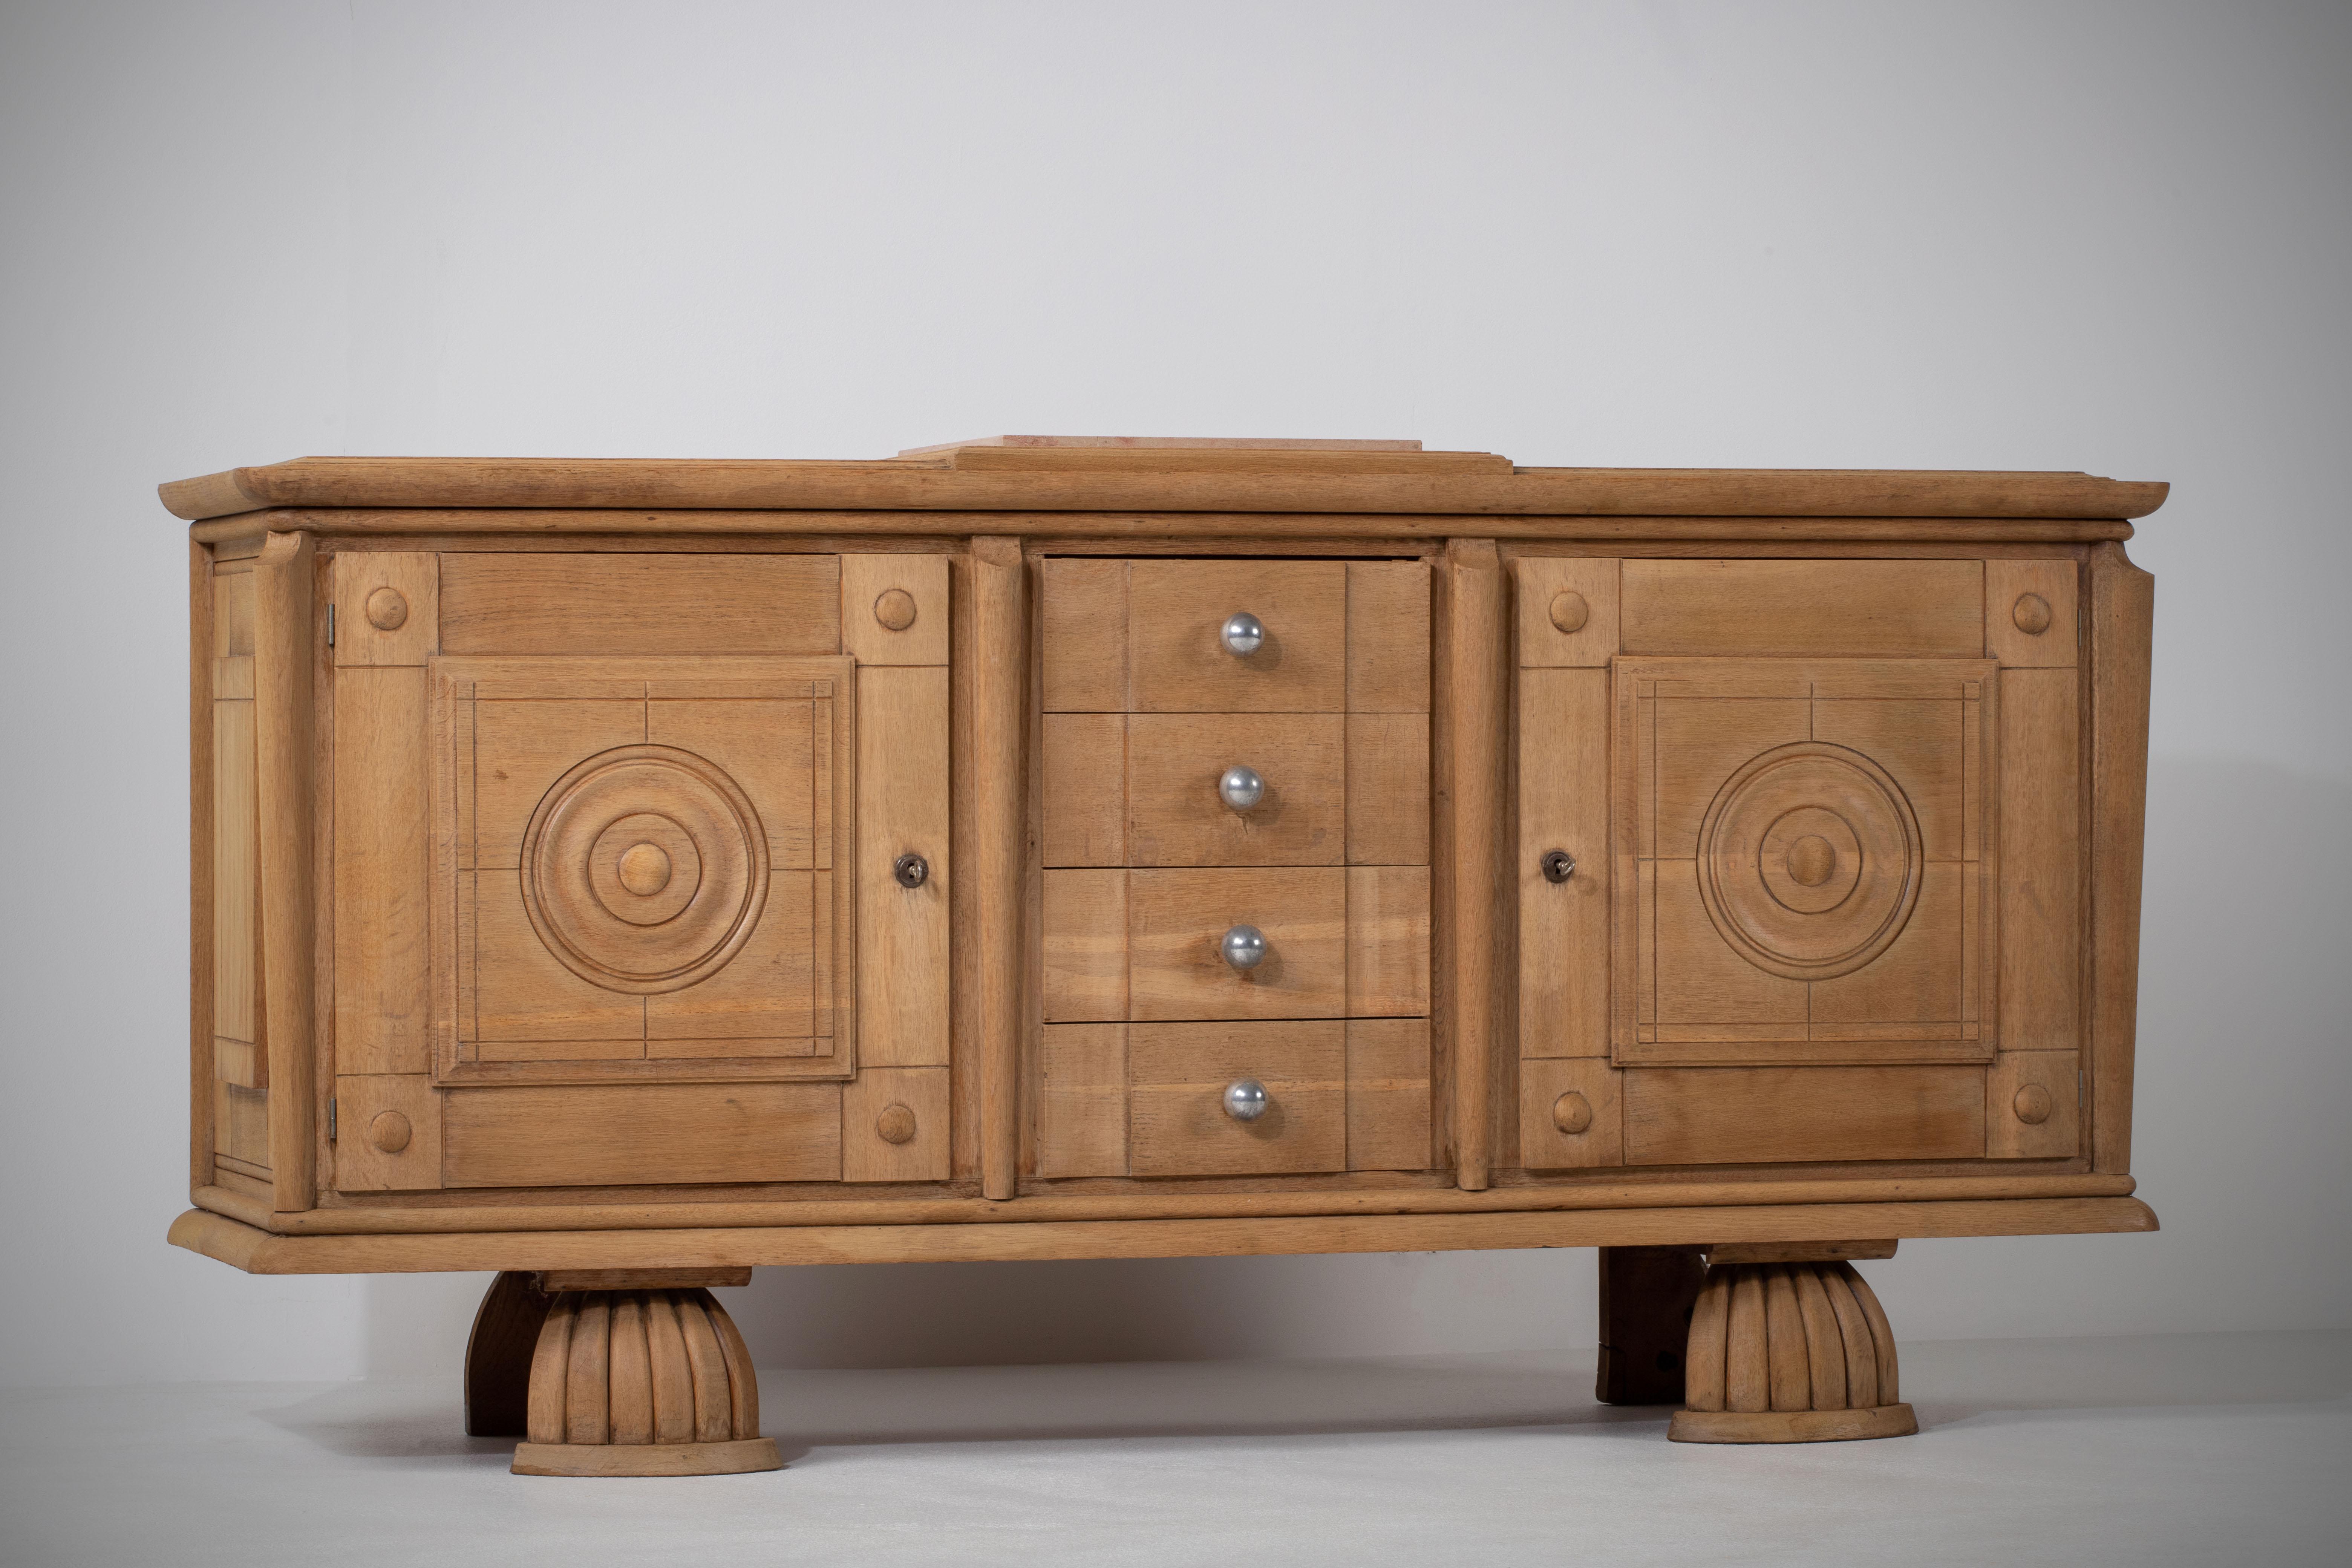 Credenza, solid oak, France, 1940s.
A matching sideboard is available.
Large Art Deco brutalist sideboard. 
The credenza consists of two storage facilities with the center drawers. 
The refined wooden structures on the doors create a striking